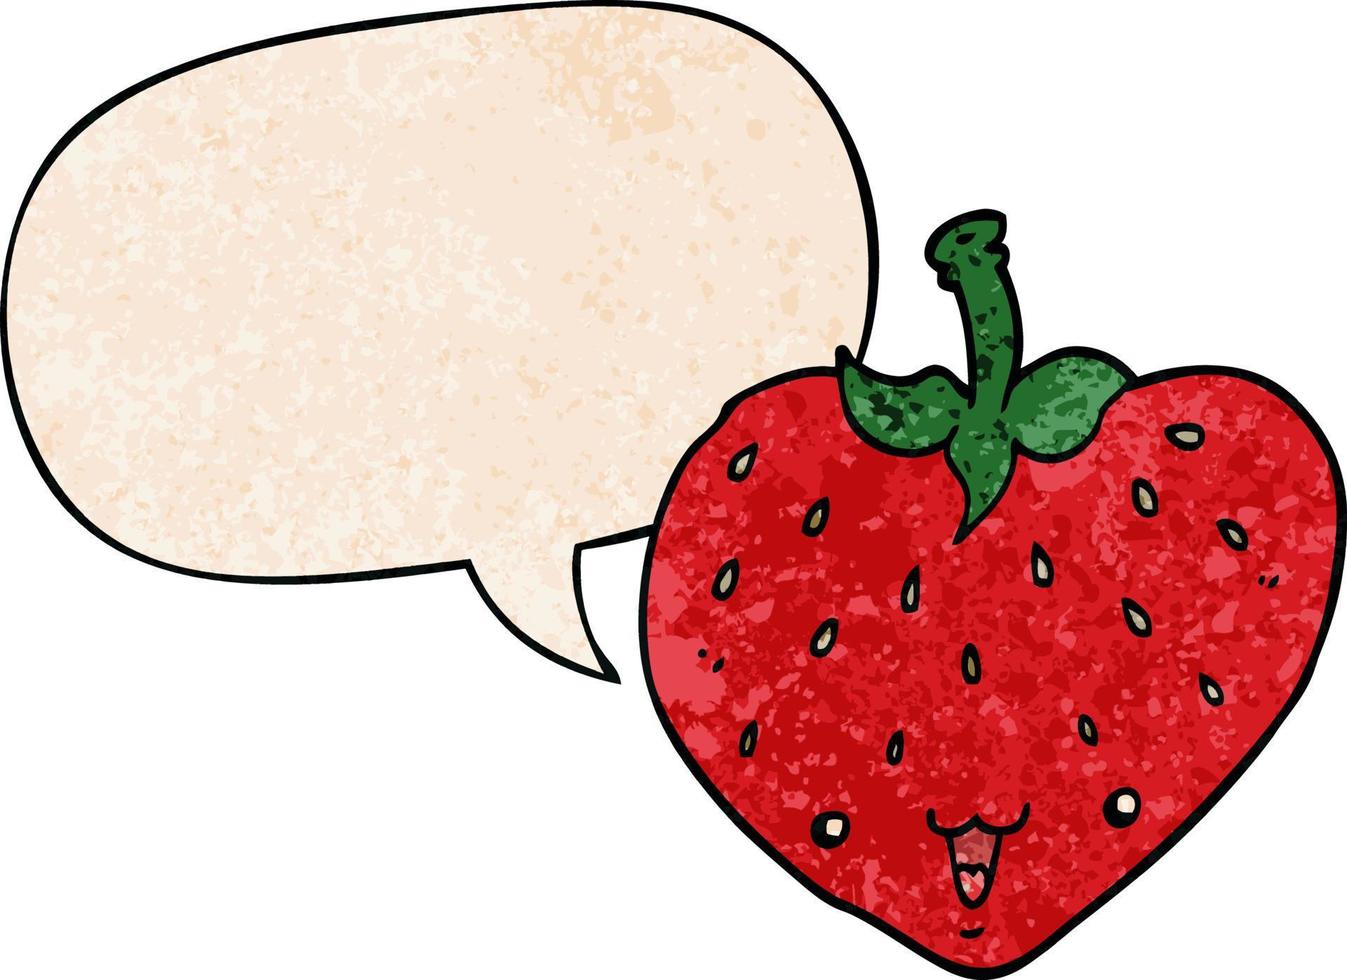 cartoon strawberry and speech bubble in retro texture style vector